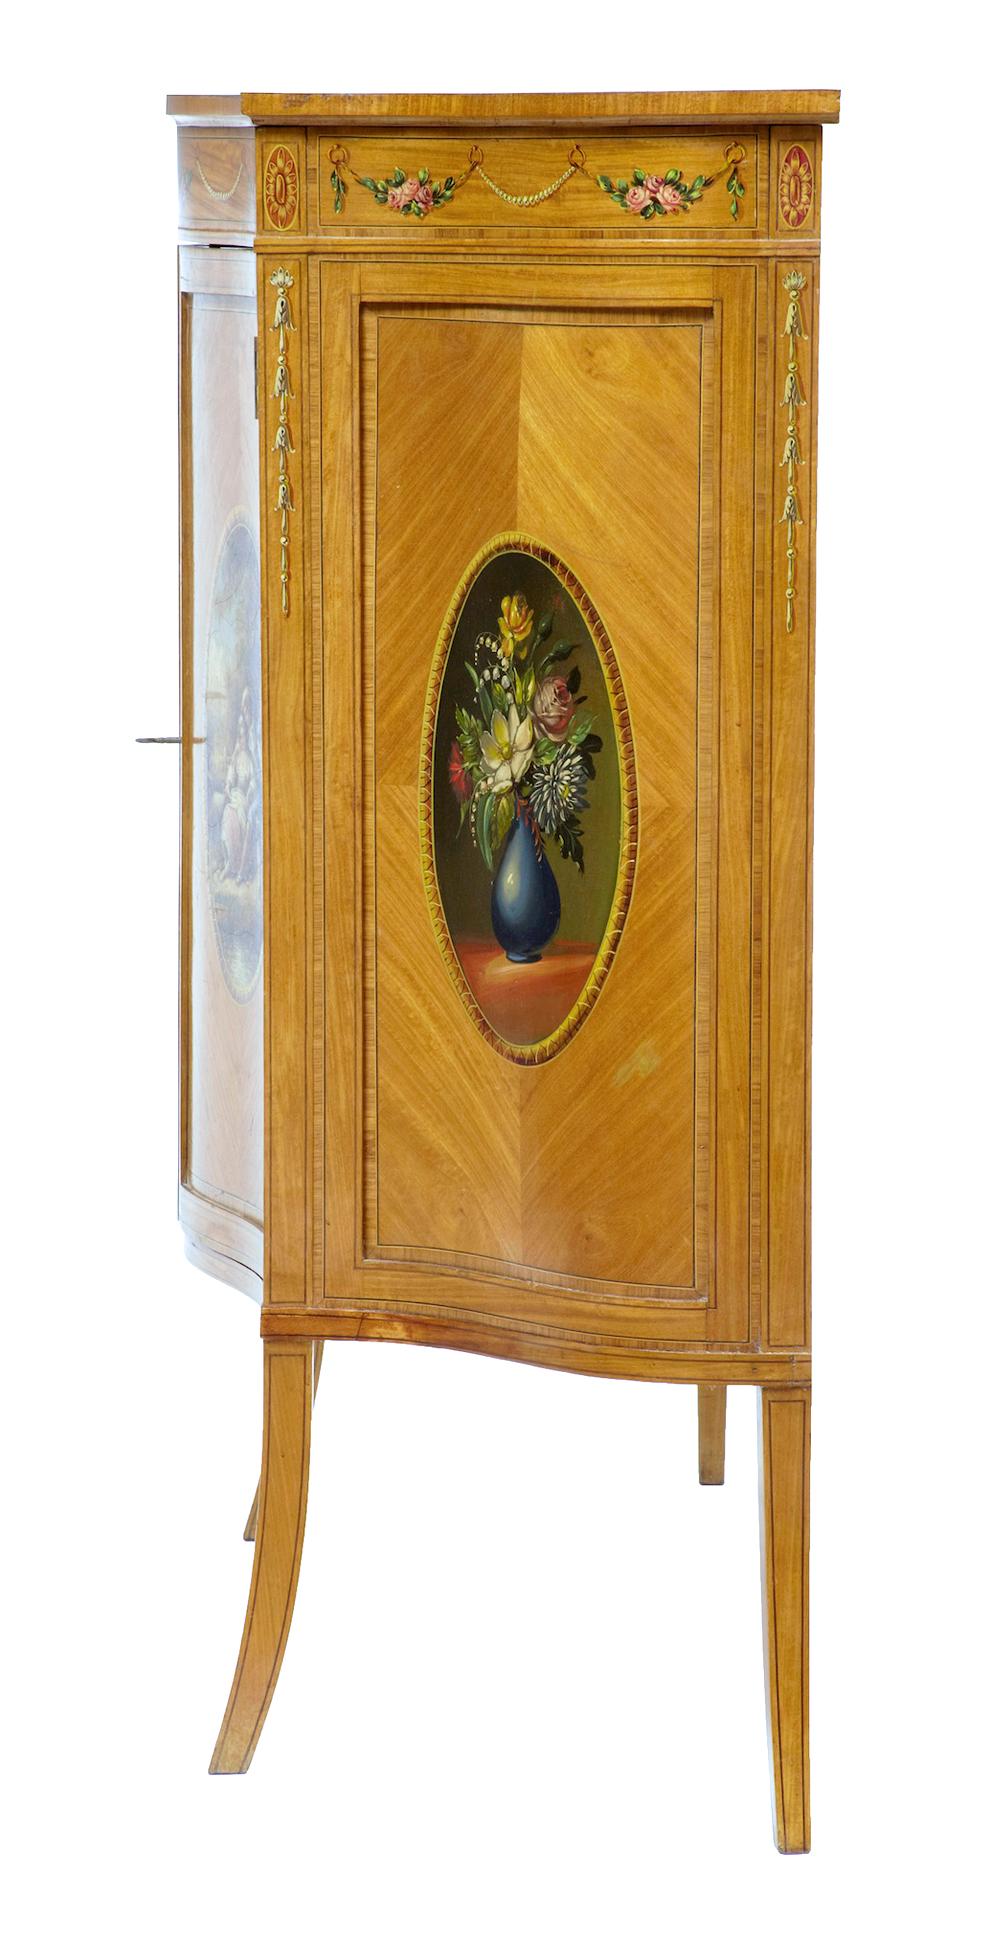 English Late 19th Century Sheraton Revival Satinwood Inlaid and Painted Cabinet